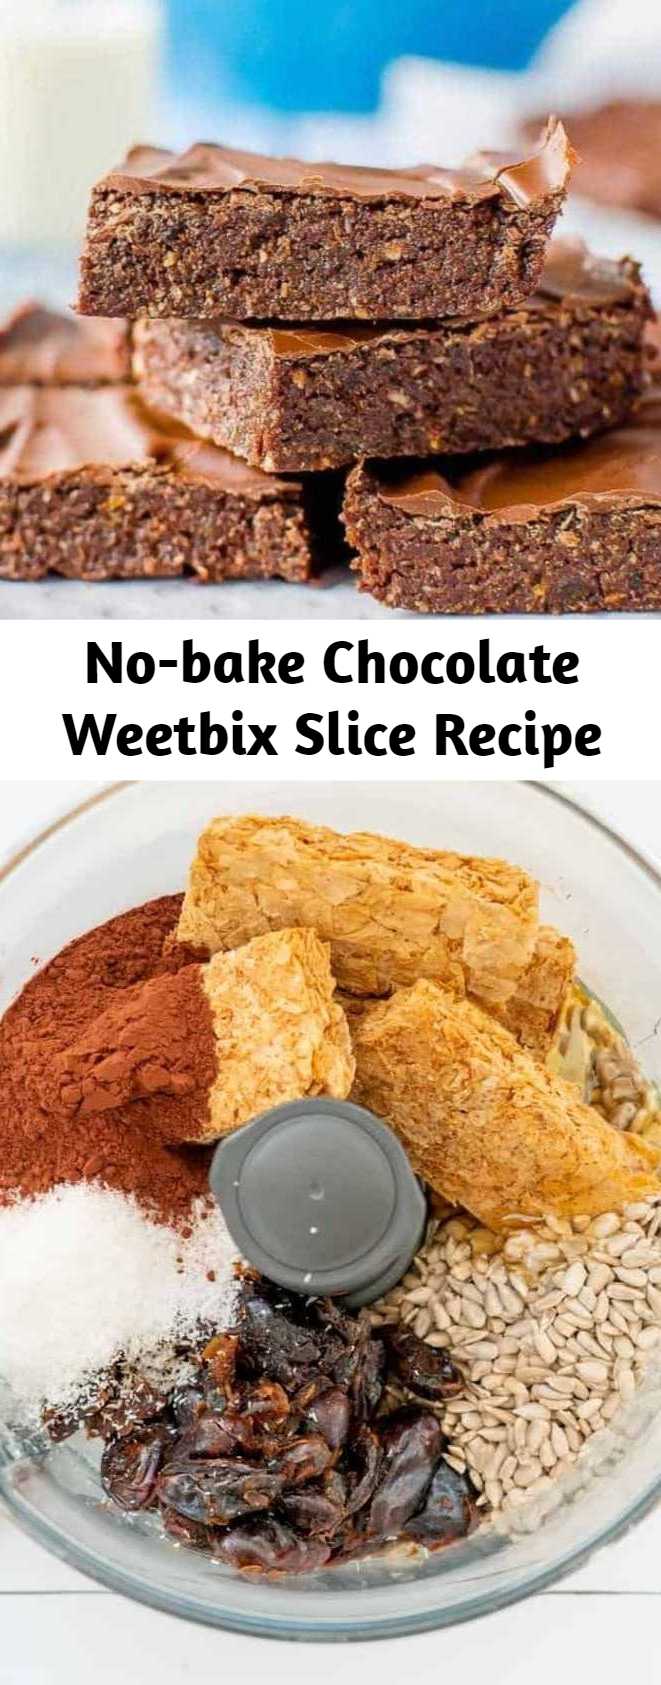 No-bake Chocolate Weetbix Slice Recipe - No-bake chocolate Weetbix slice, easy kid-friendly recipe made with Weetabix, or wheat biscuit breakfast cereal.